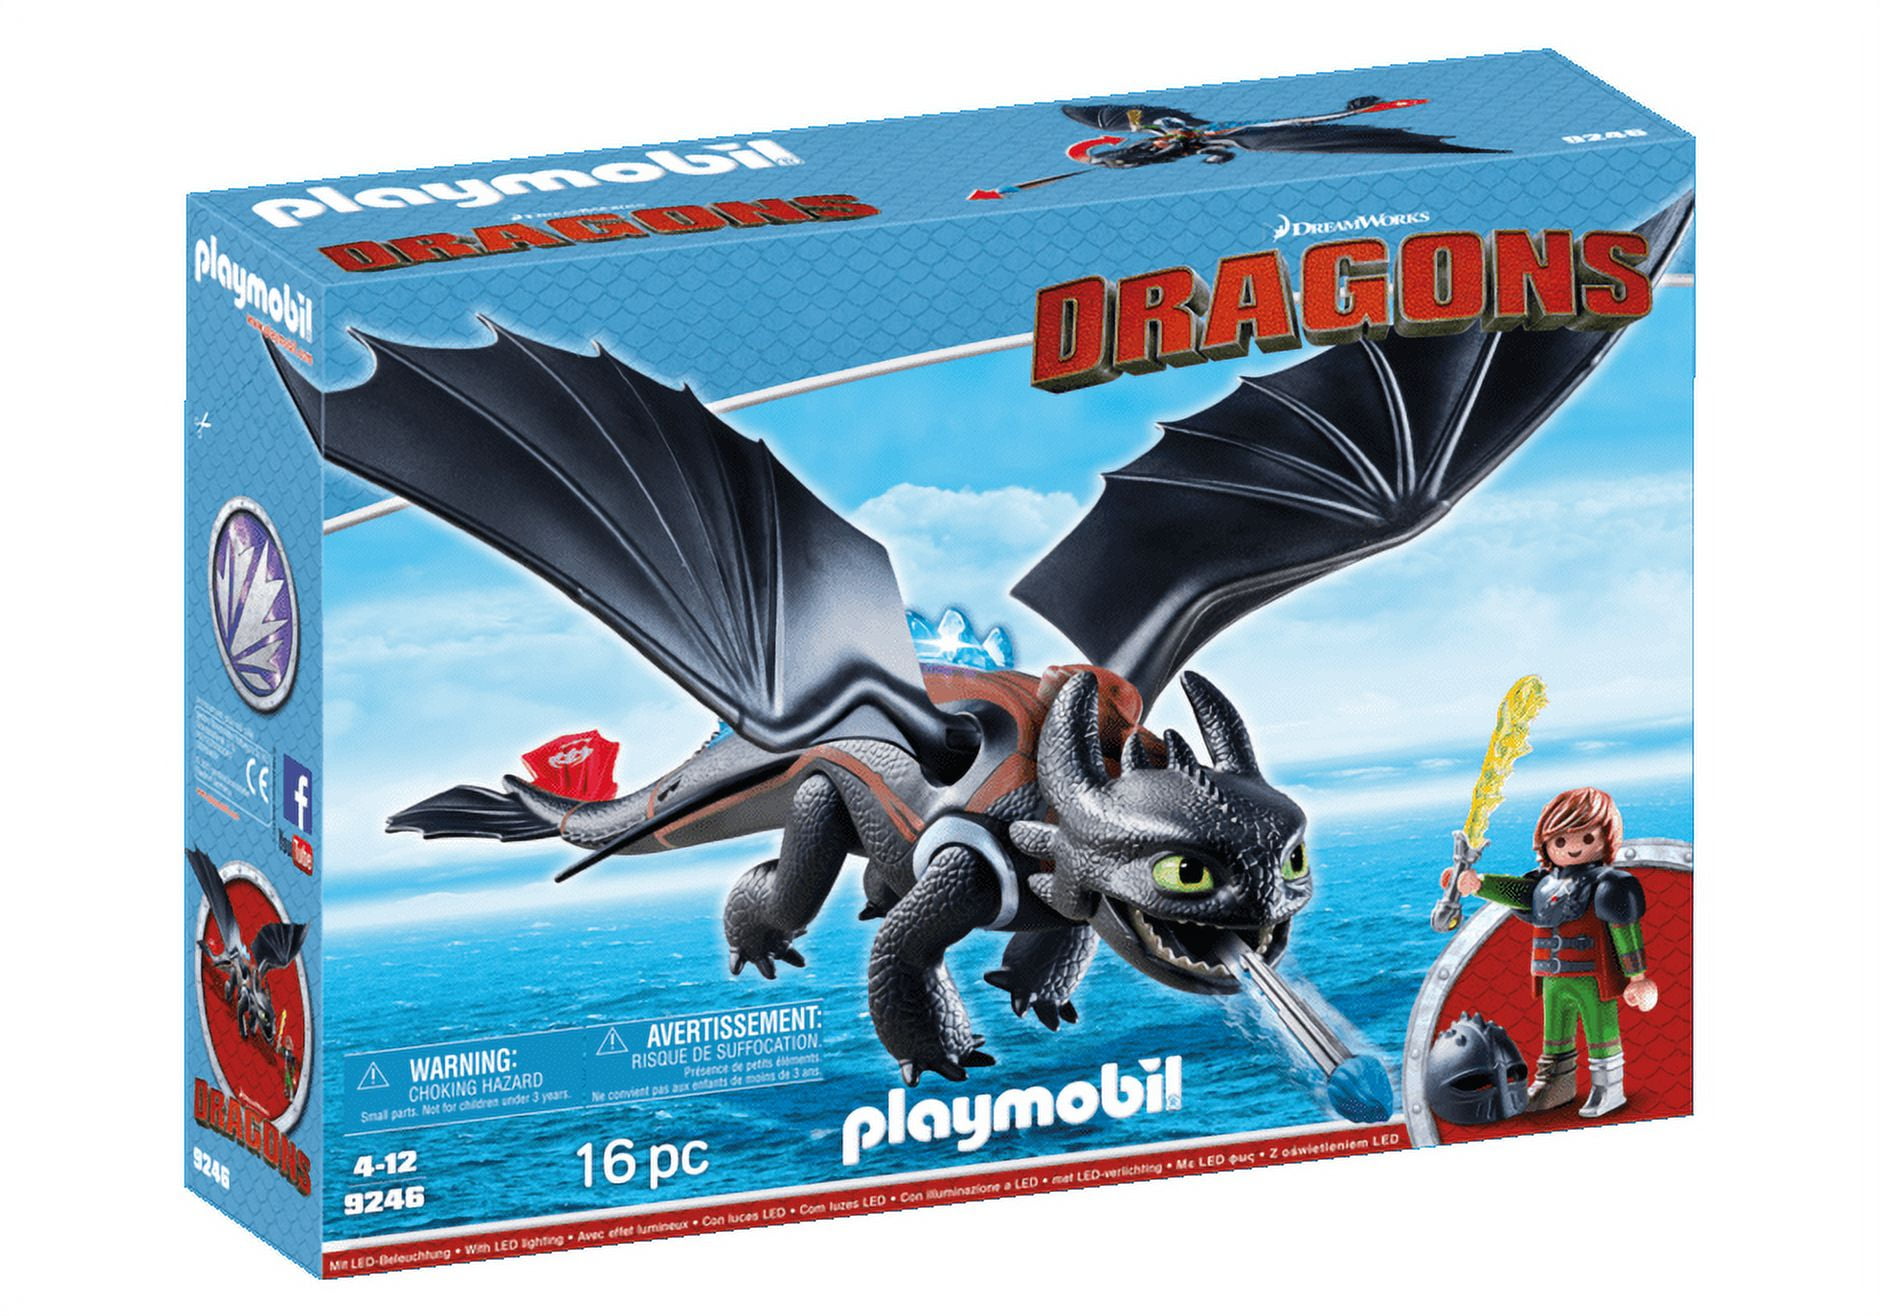 Playmobil DRAGONS #9246 Hiccup and Toothless - New Factory Sealed